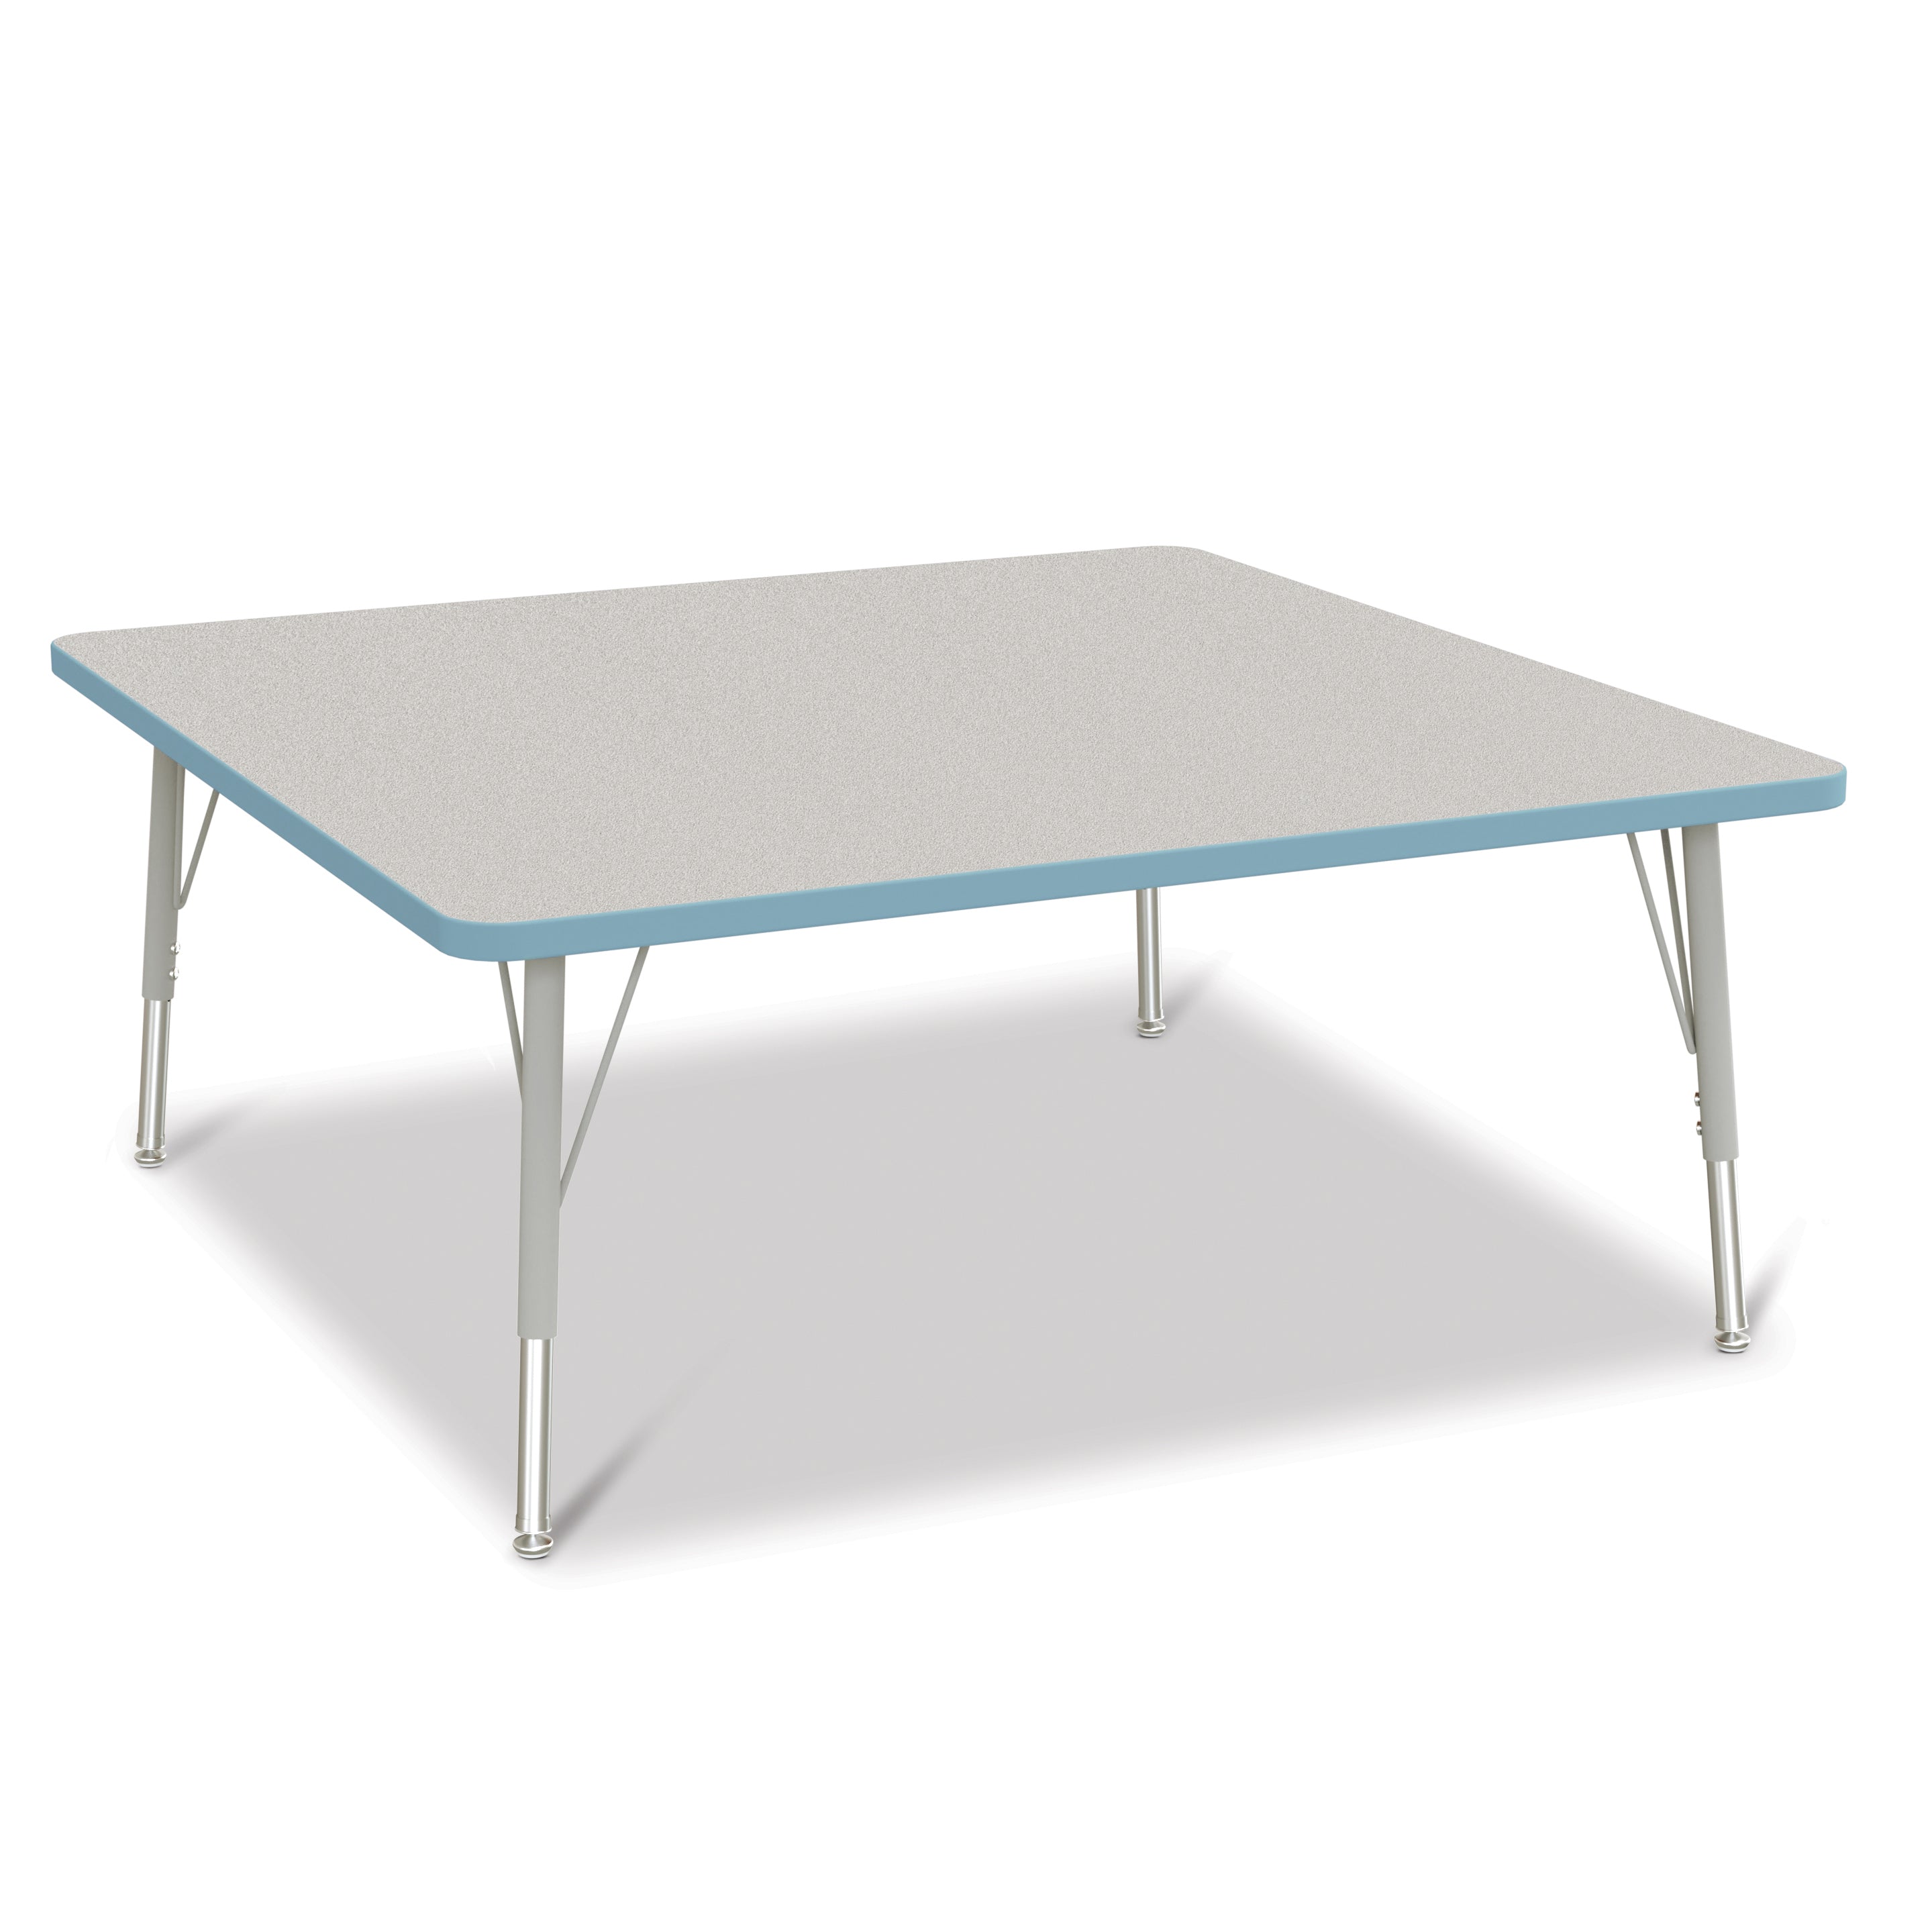 6418JCE131, Berries Square Activity Table - 48" X 48", E-height - Freckled Gray/Coastal Blue/Gray